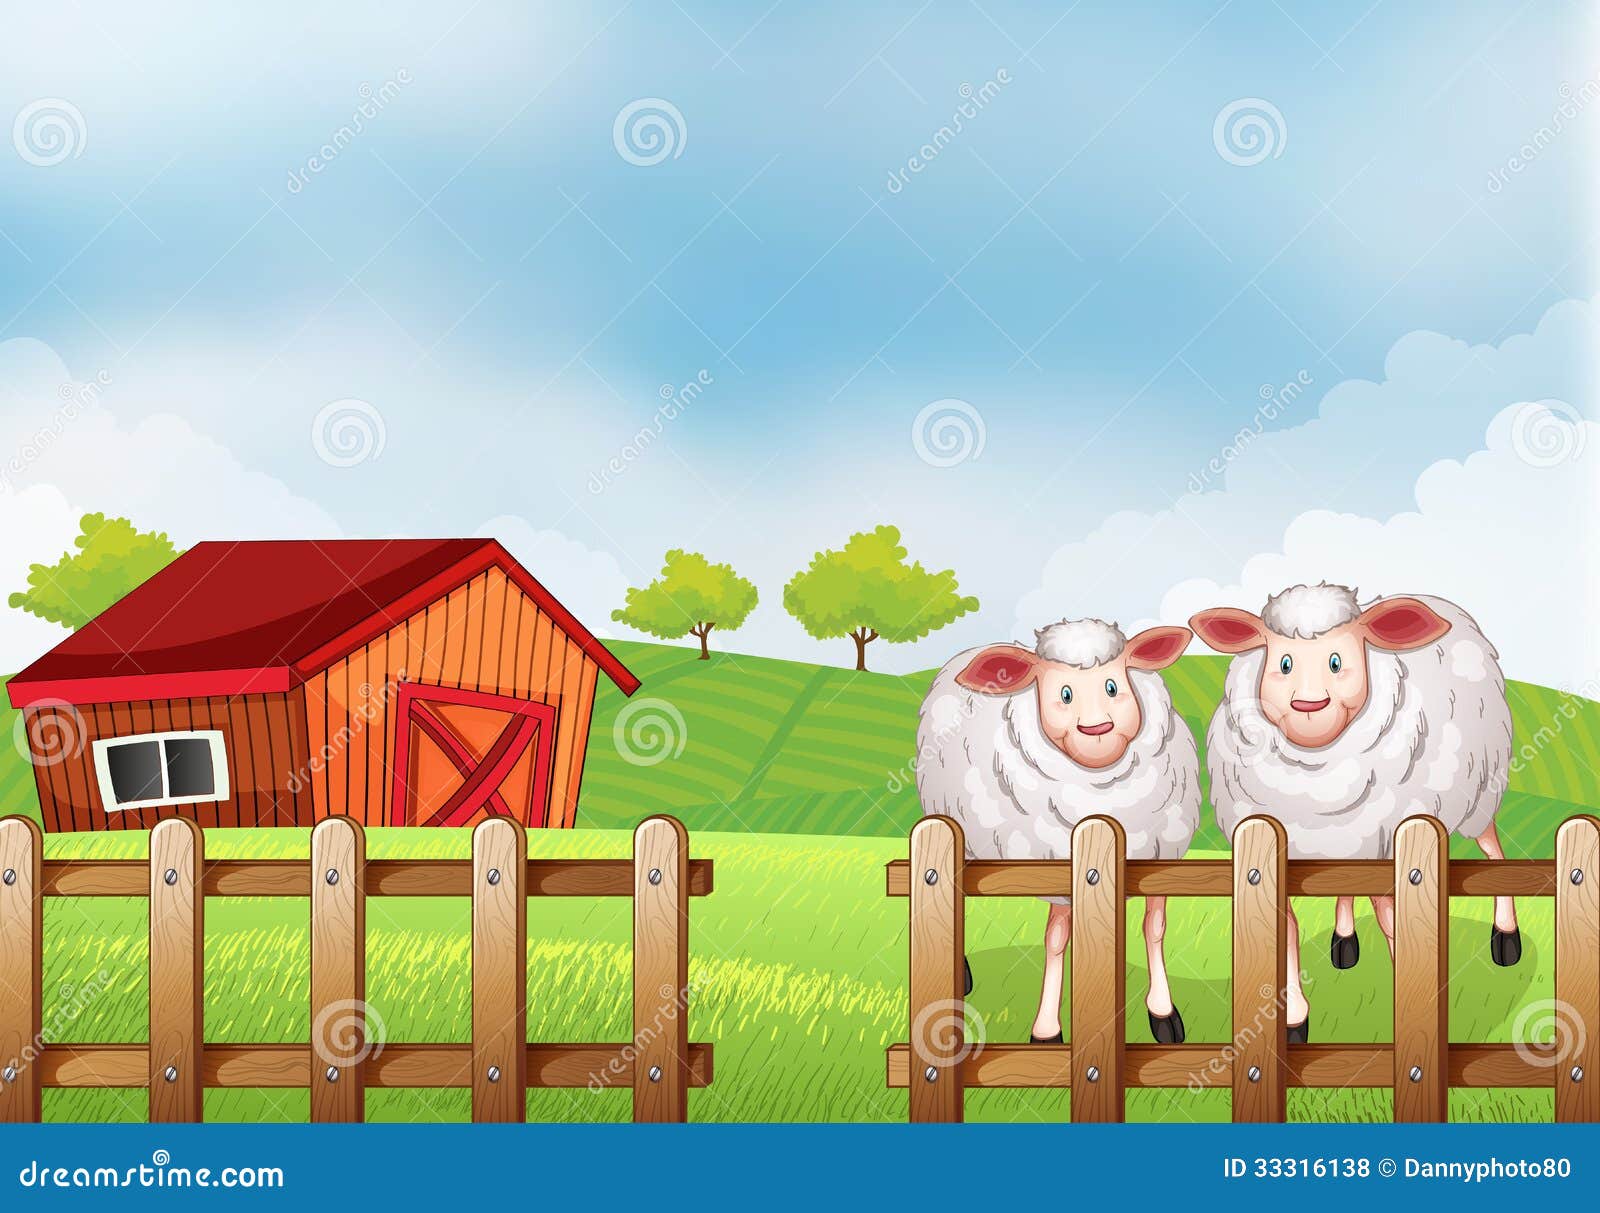 Sheeps Inside The Wooden Fence With A Barn Stock 